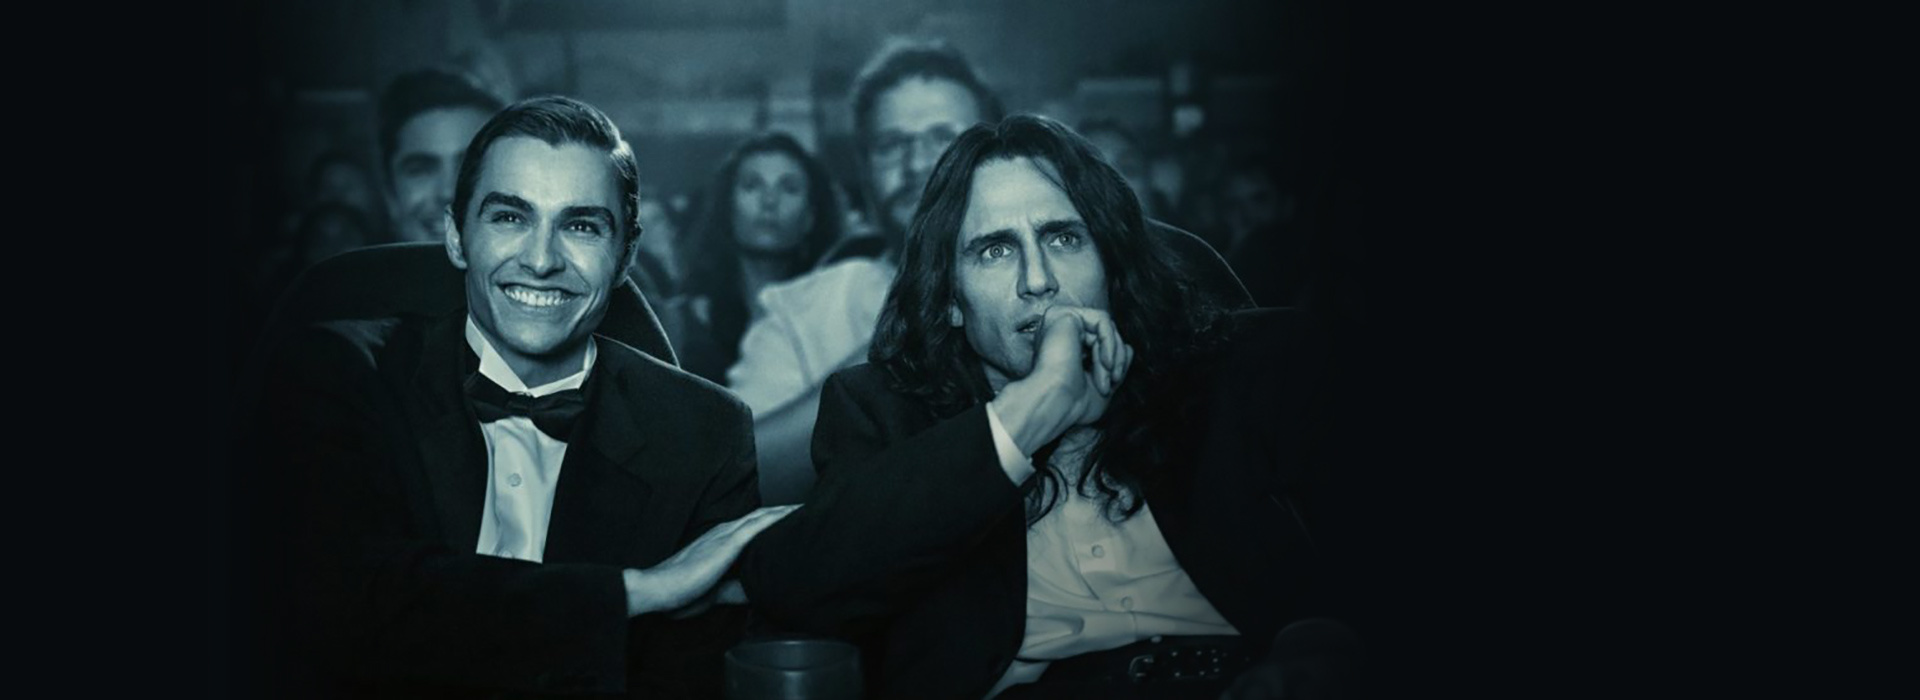 Movie poster The Disaster Artist